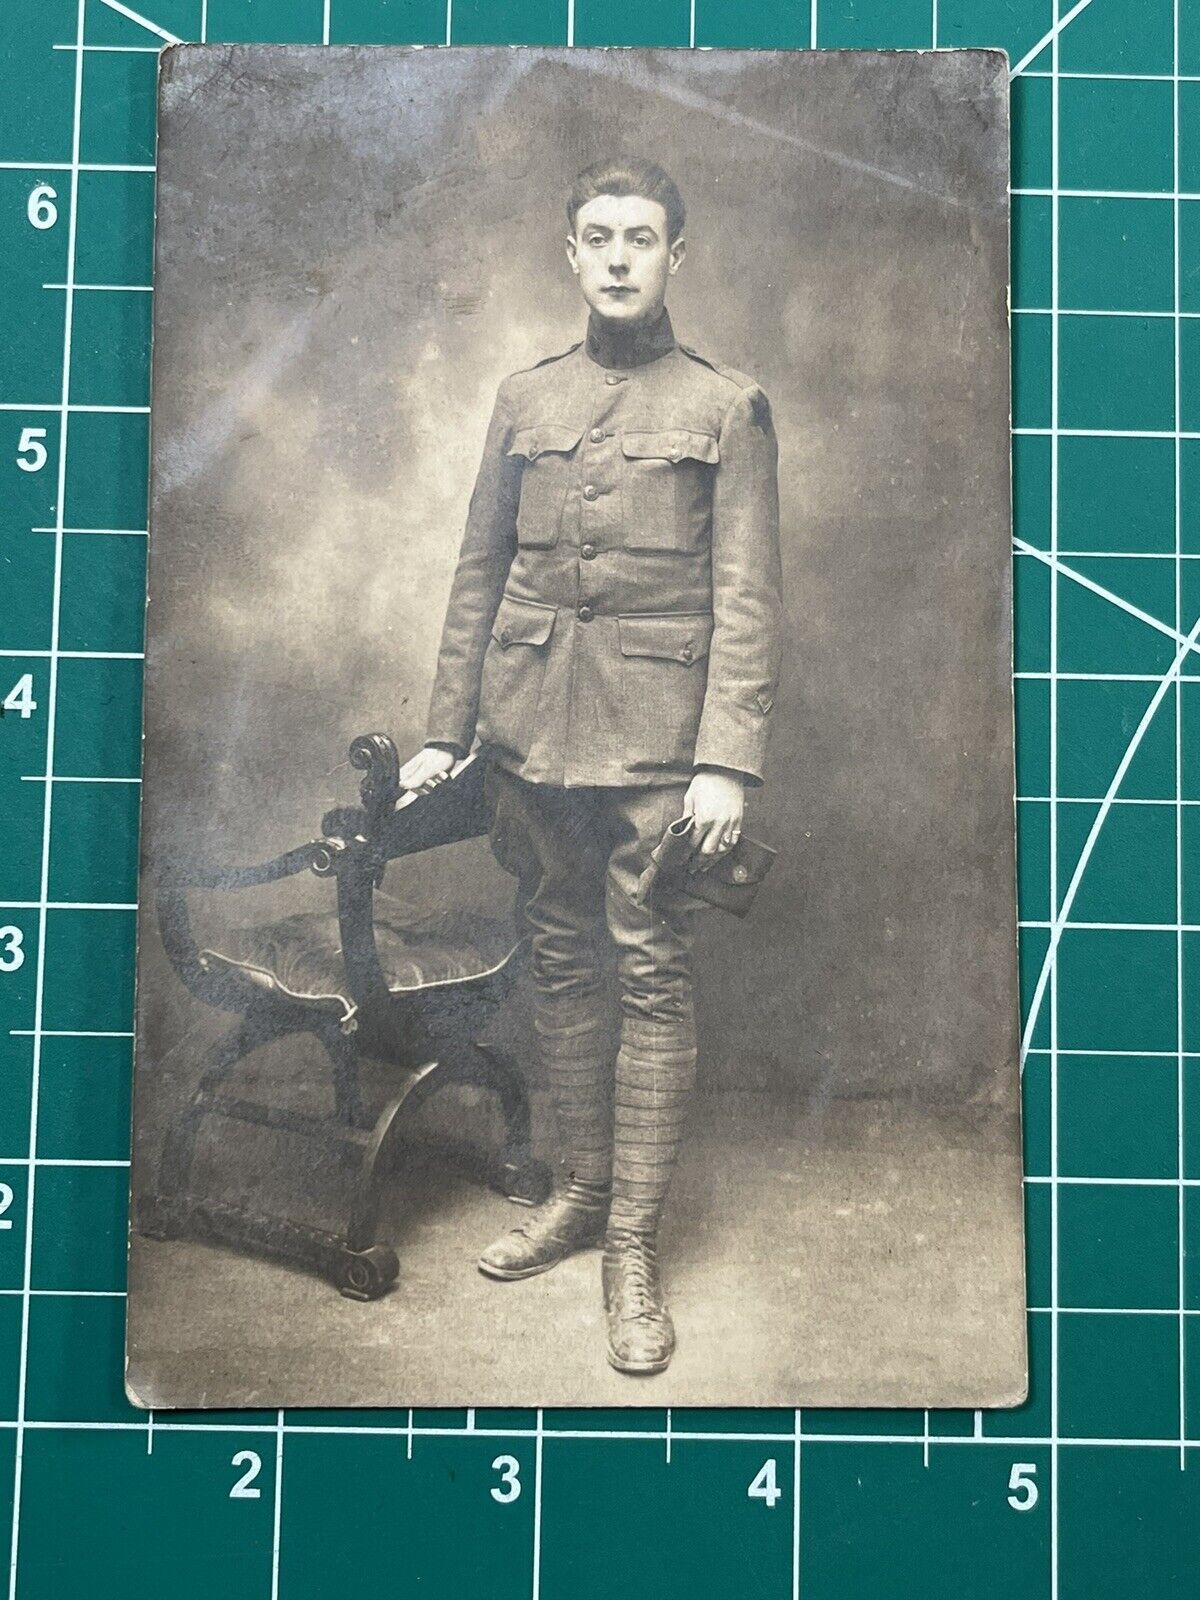 WW1 6th Infantry Division Dougboy Soldier Photo